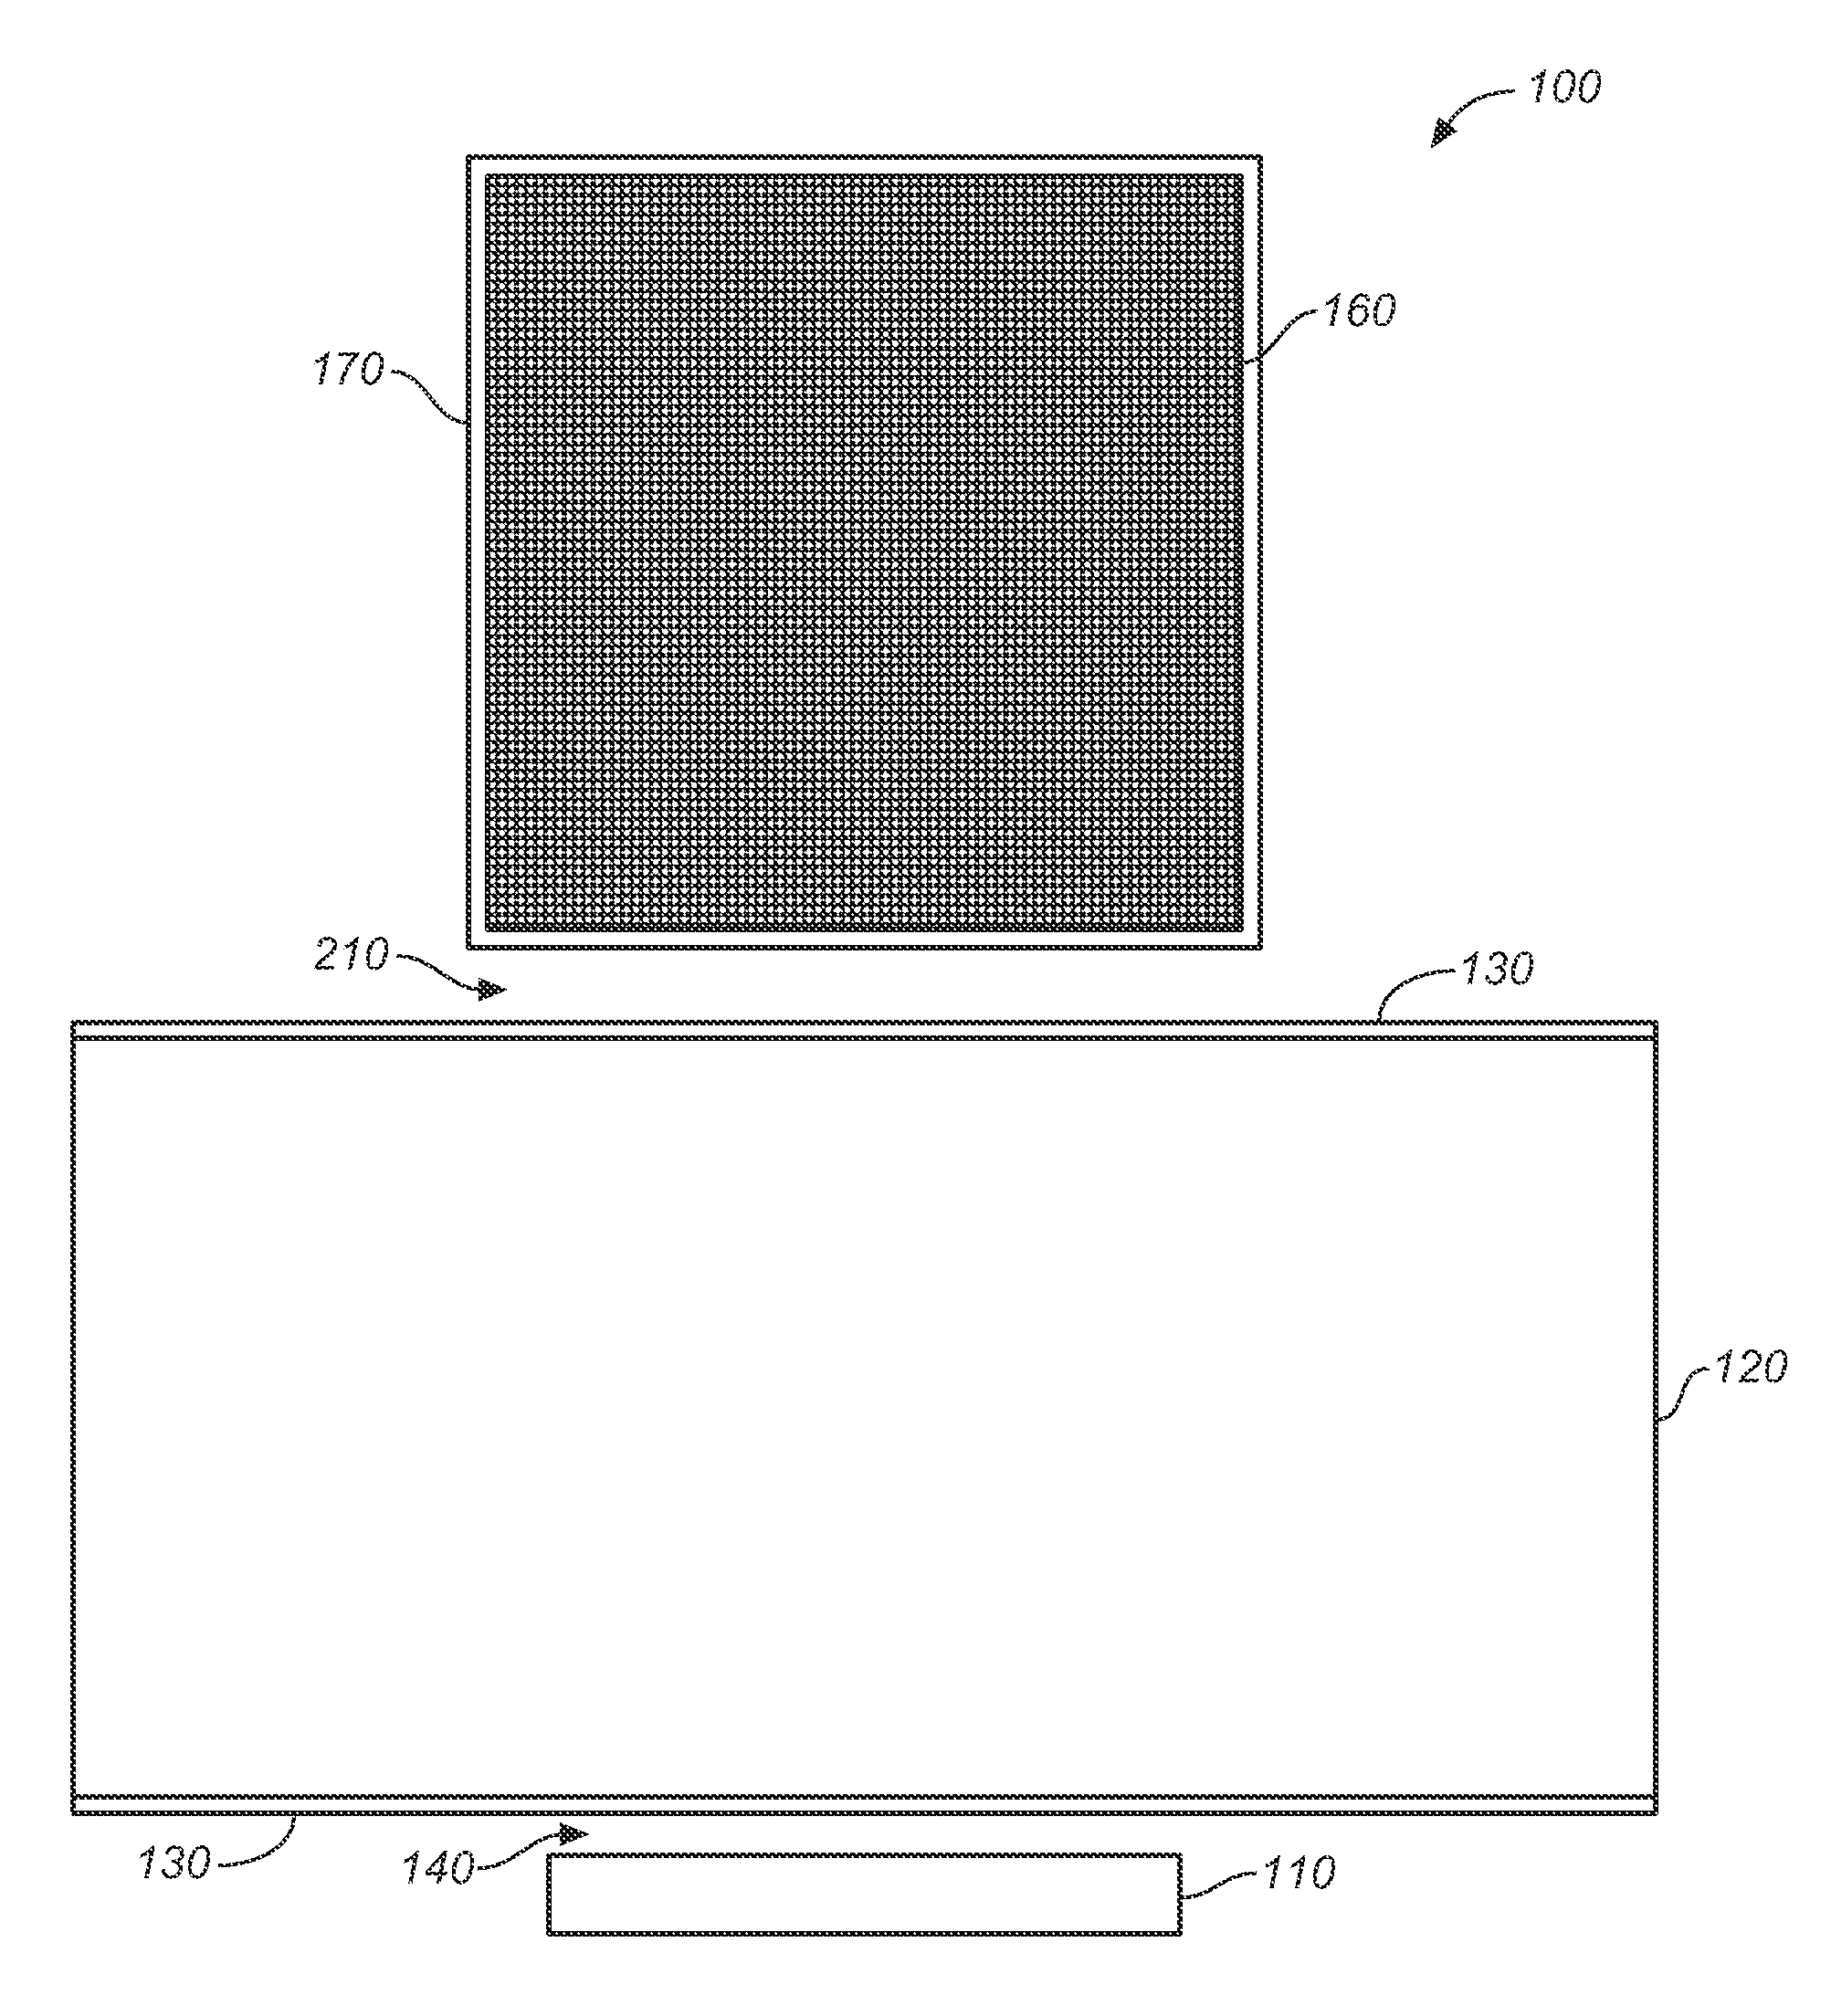 Compact Device for Dual Transmutation for Isotope Production Permitting Production of Positron Emitters, Beta Emitters and Alpha Emitters Using Energetic Electrons